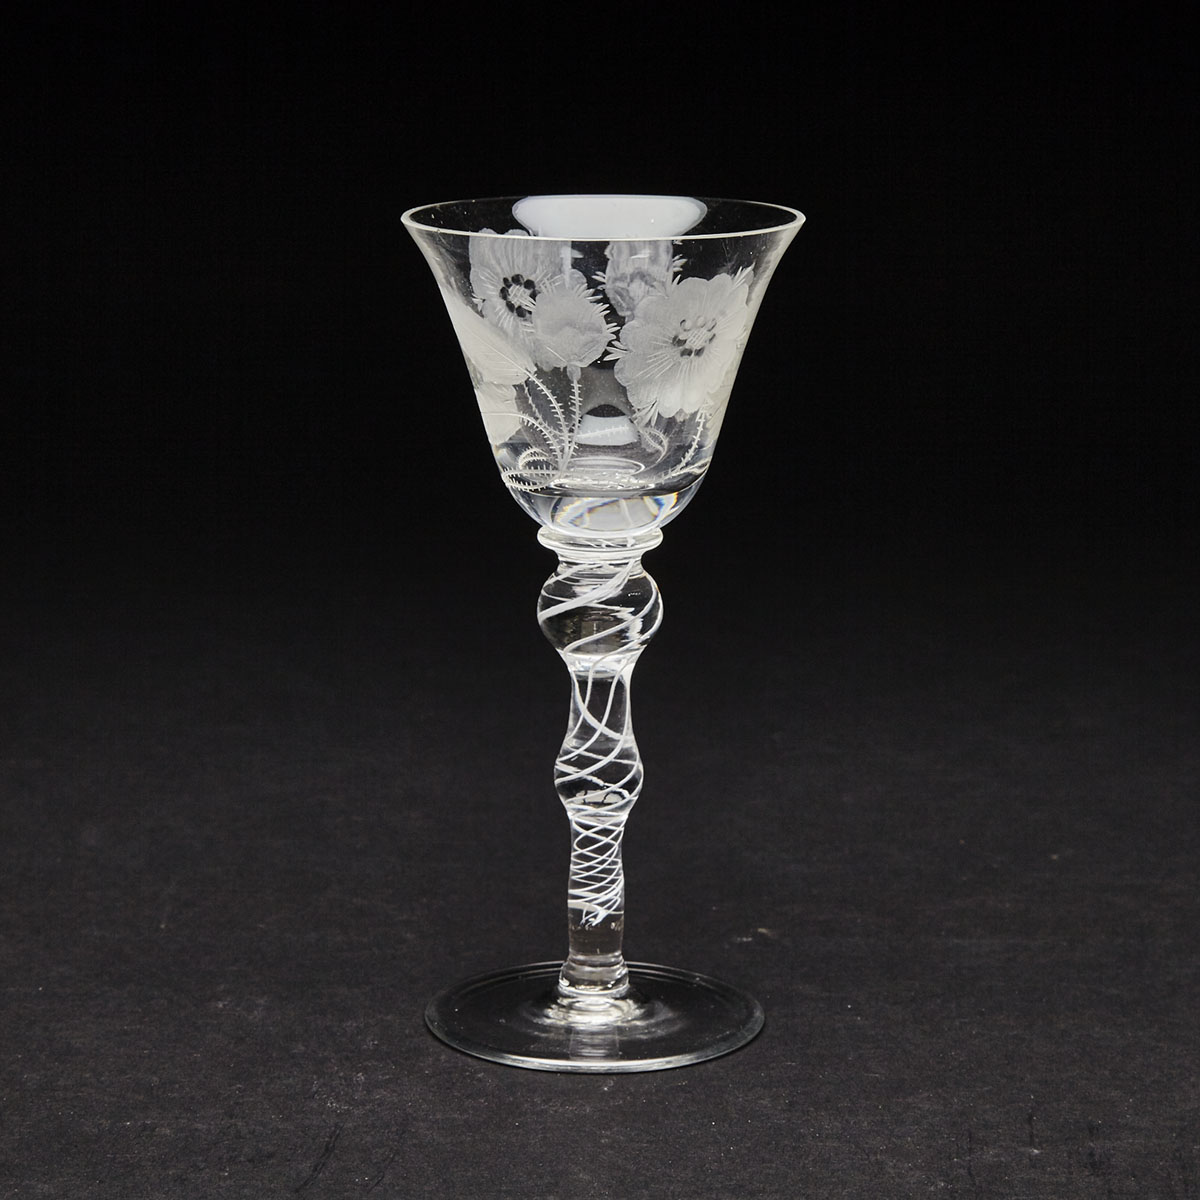 Engraved Opaque Twist Stemmed Wine Glass, late 19th/20th century